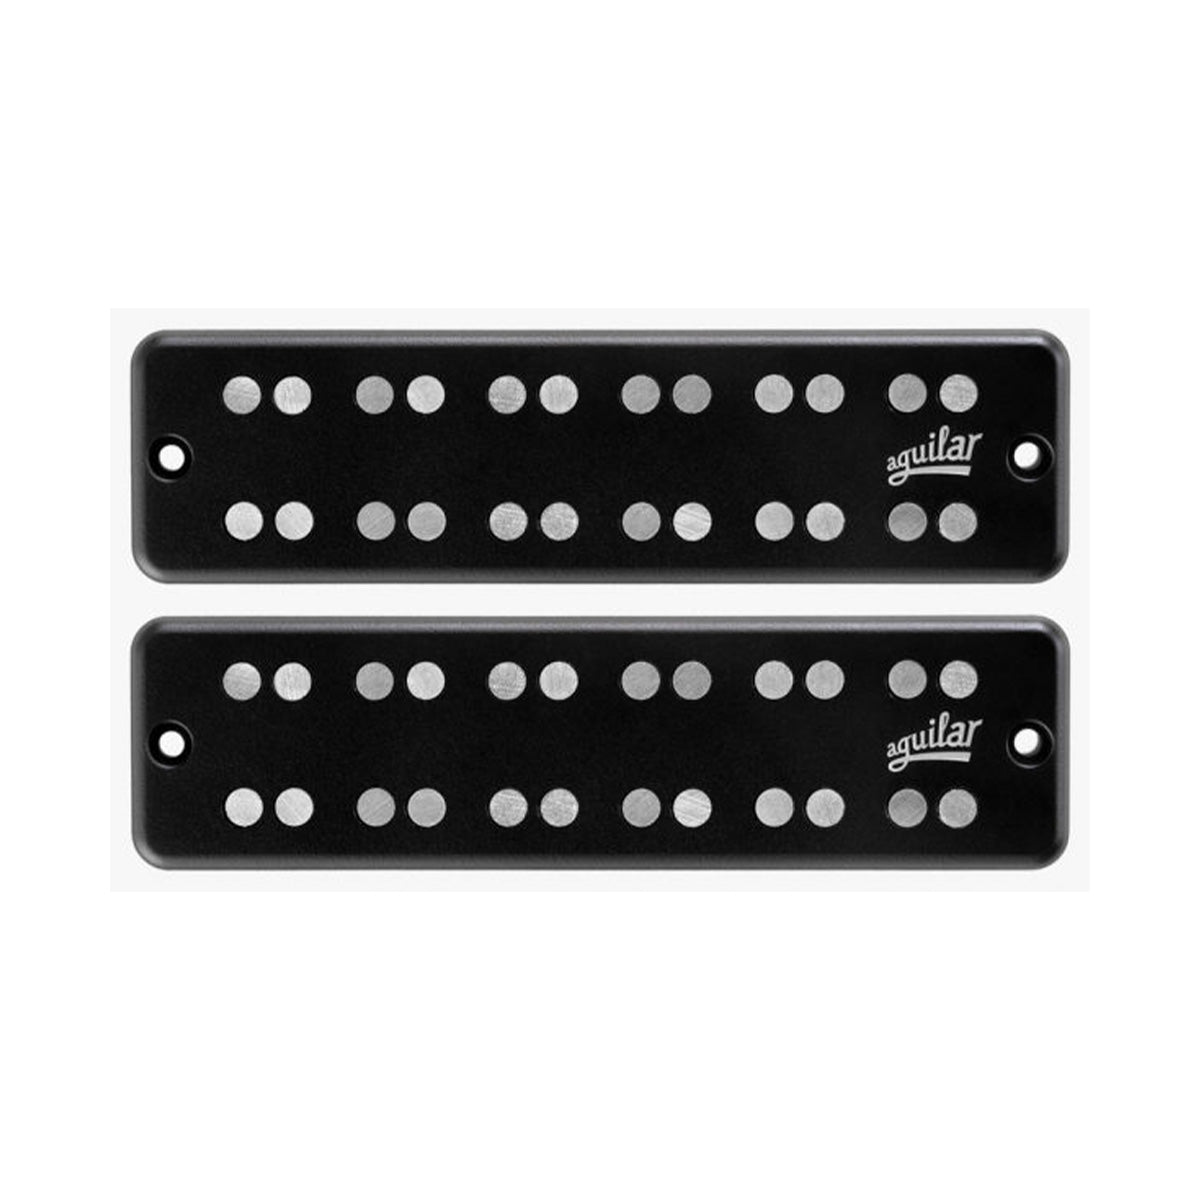 Aguilar AG 6SD-D4 6-String Super Double Bass Pickup Set  by Aguilar Shop